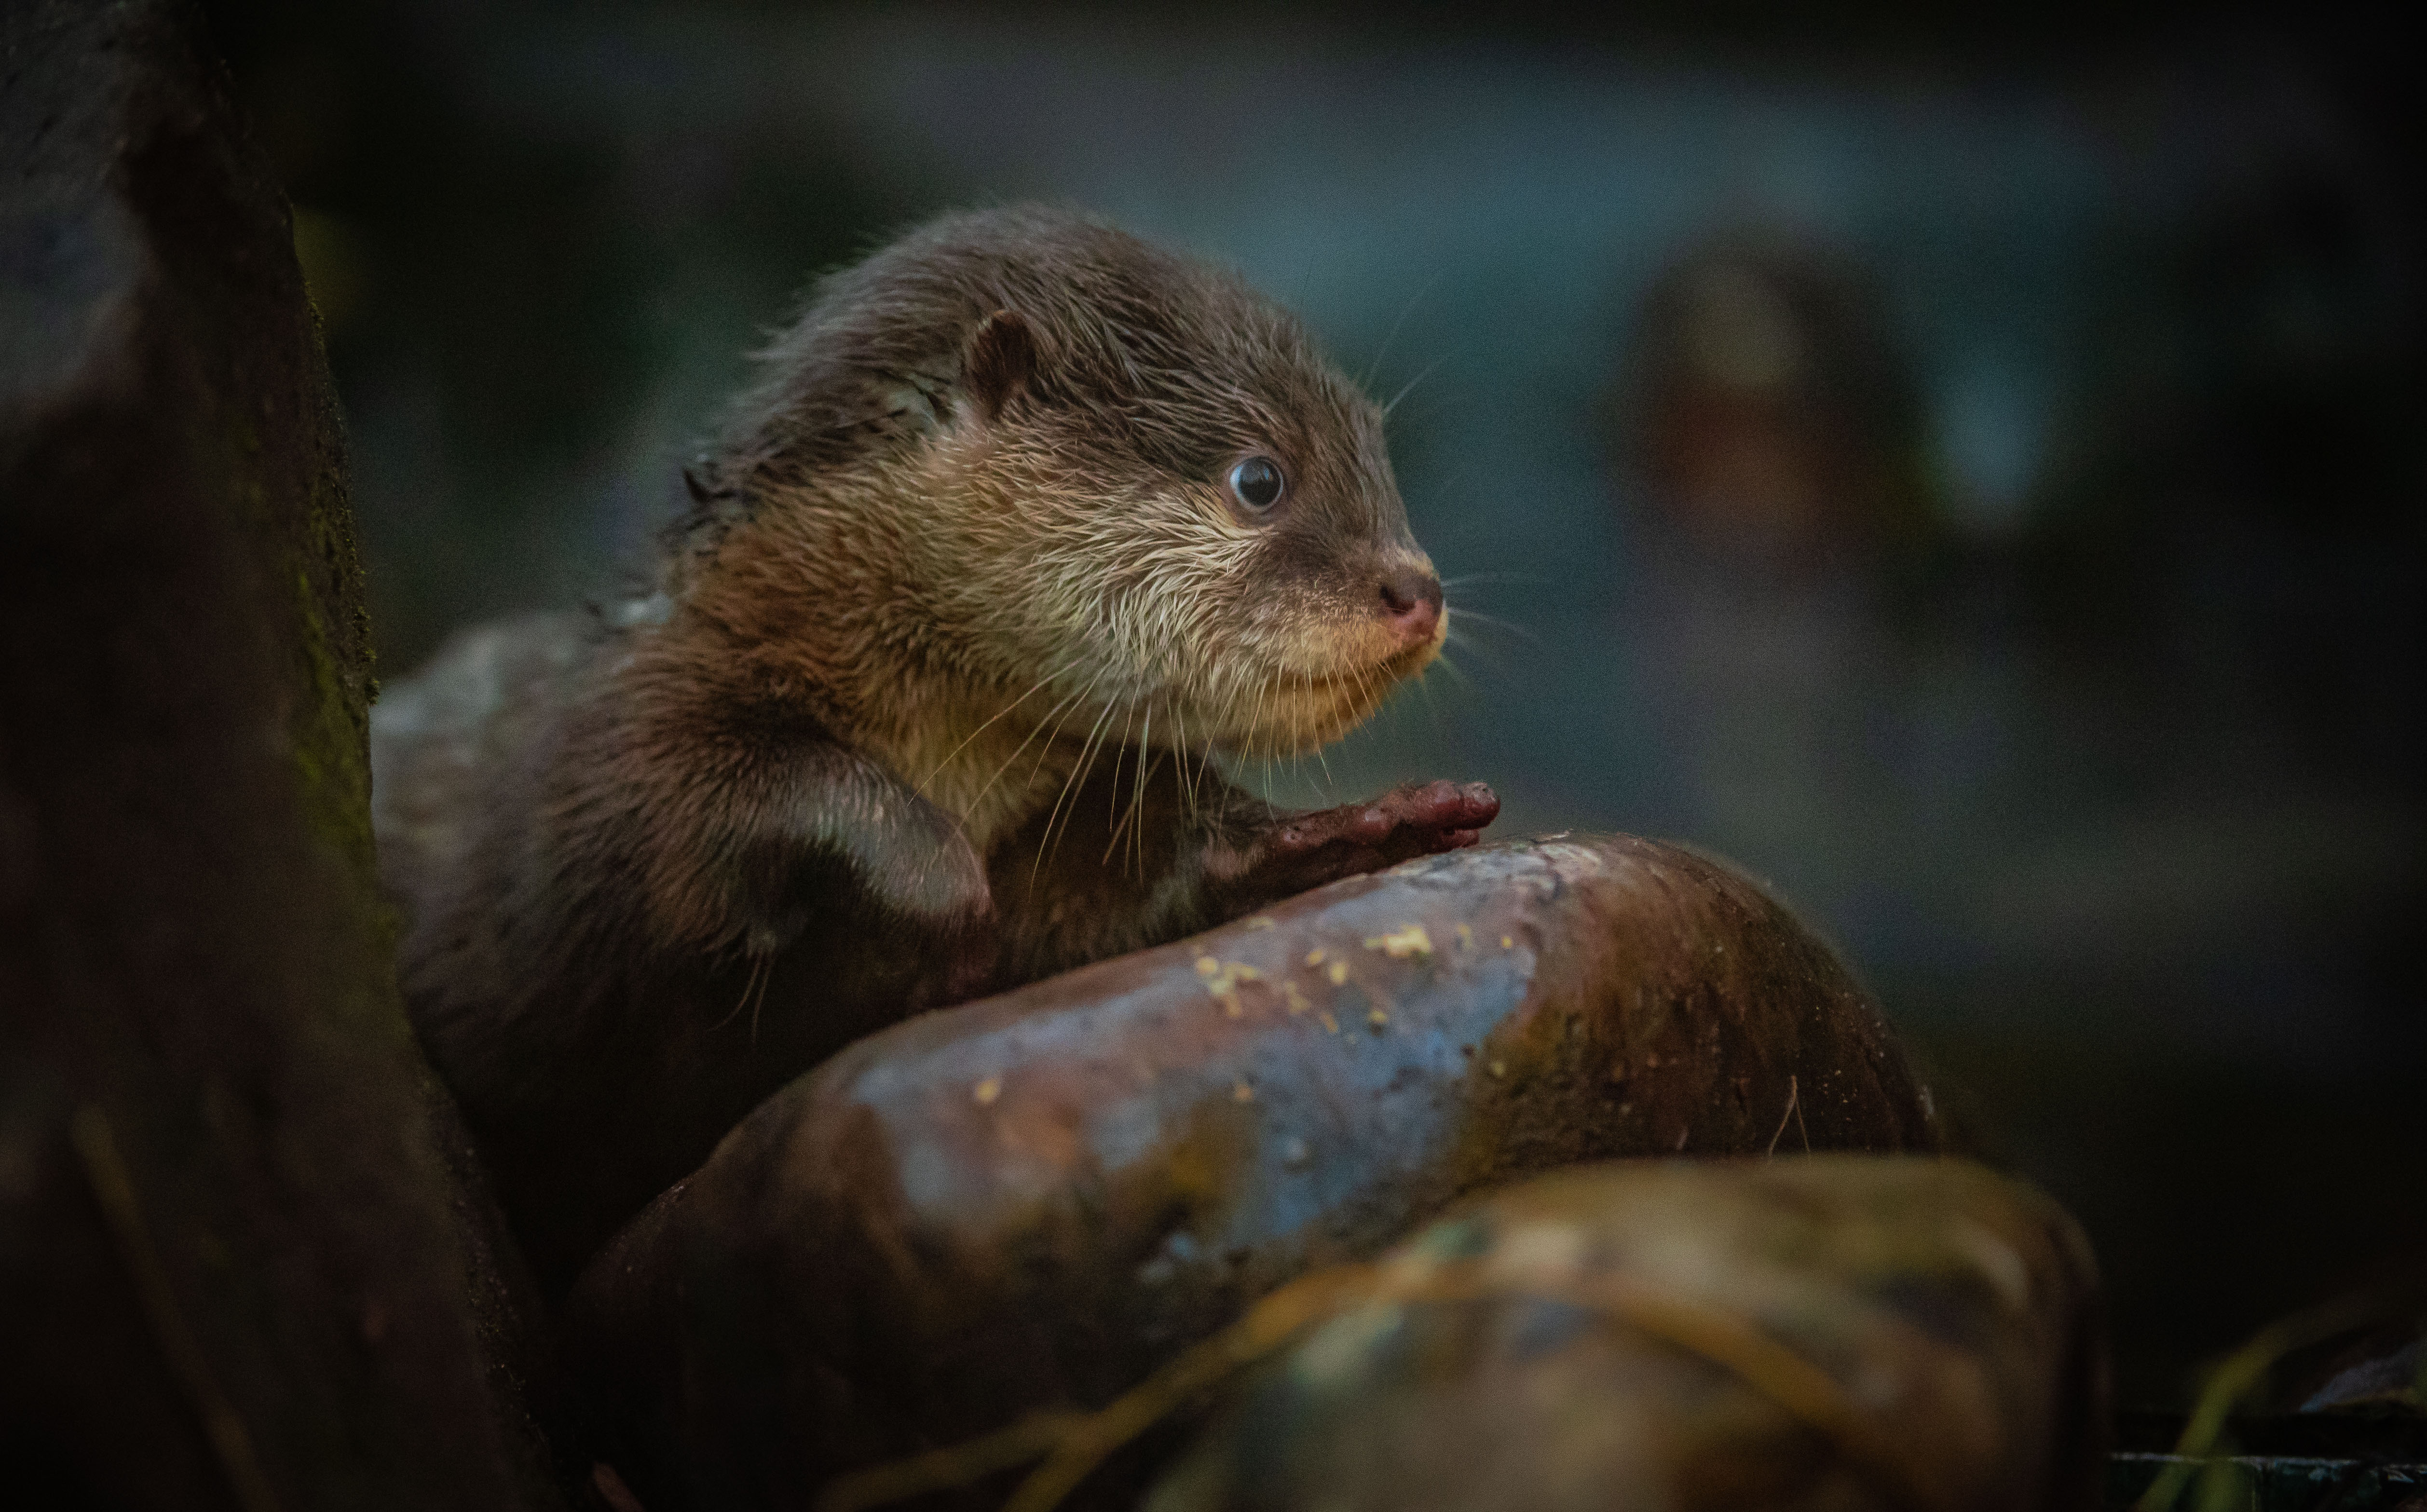 A close up of one of the otter pups